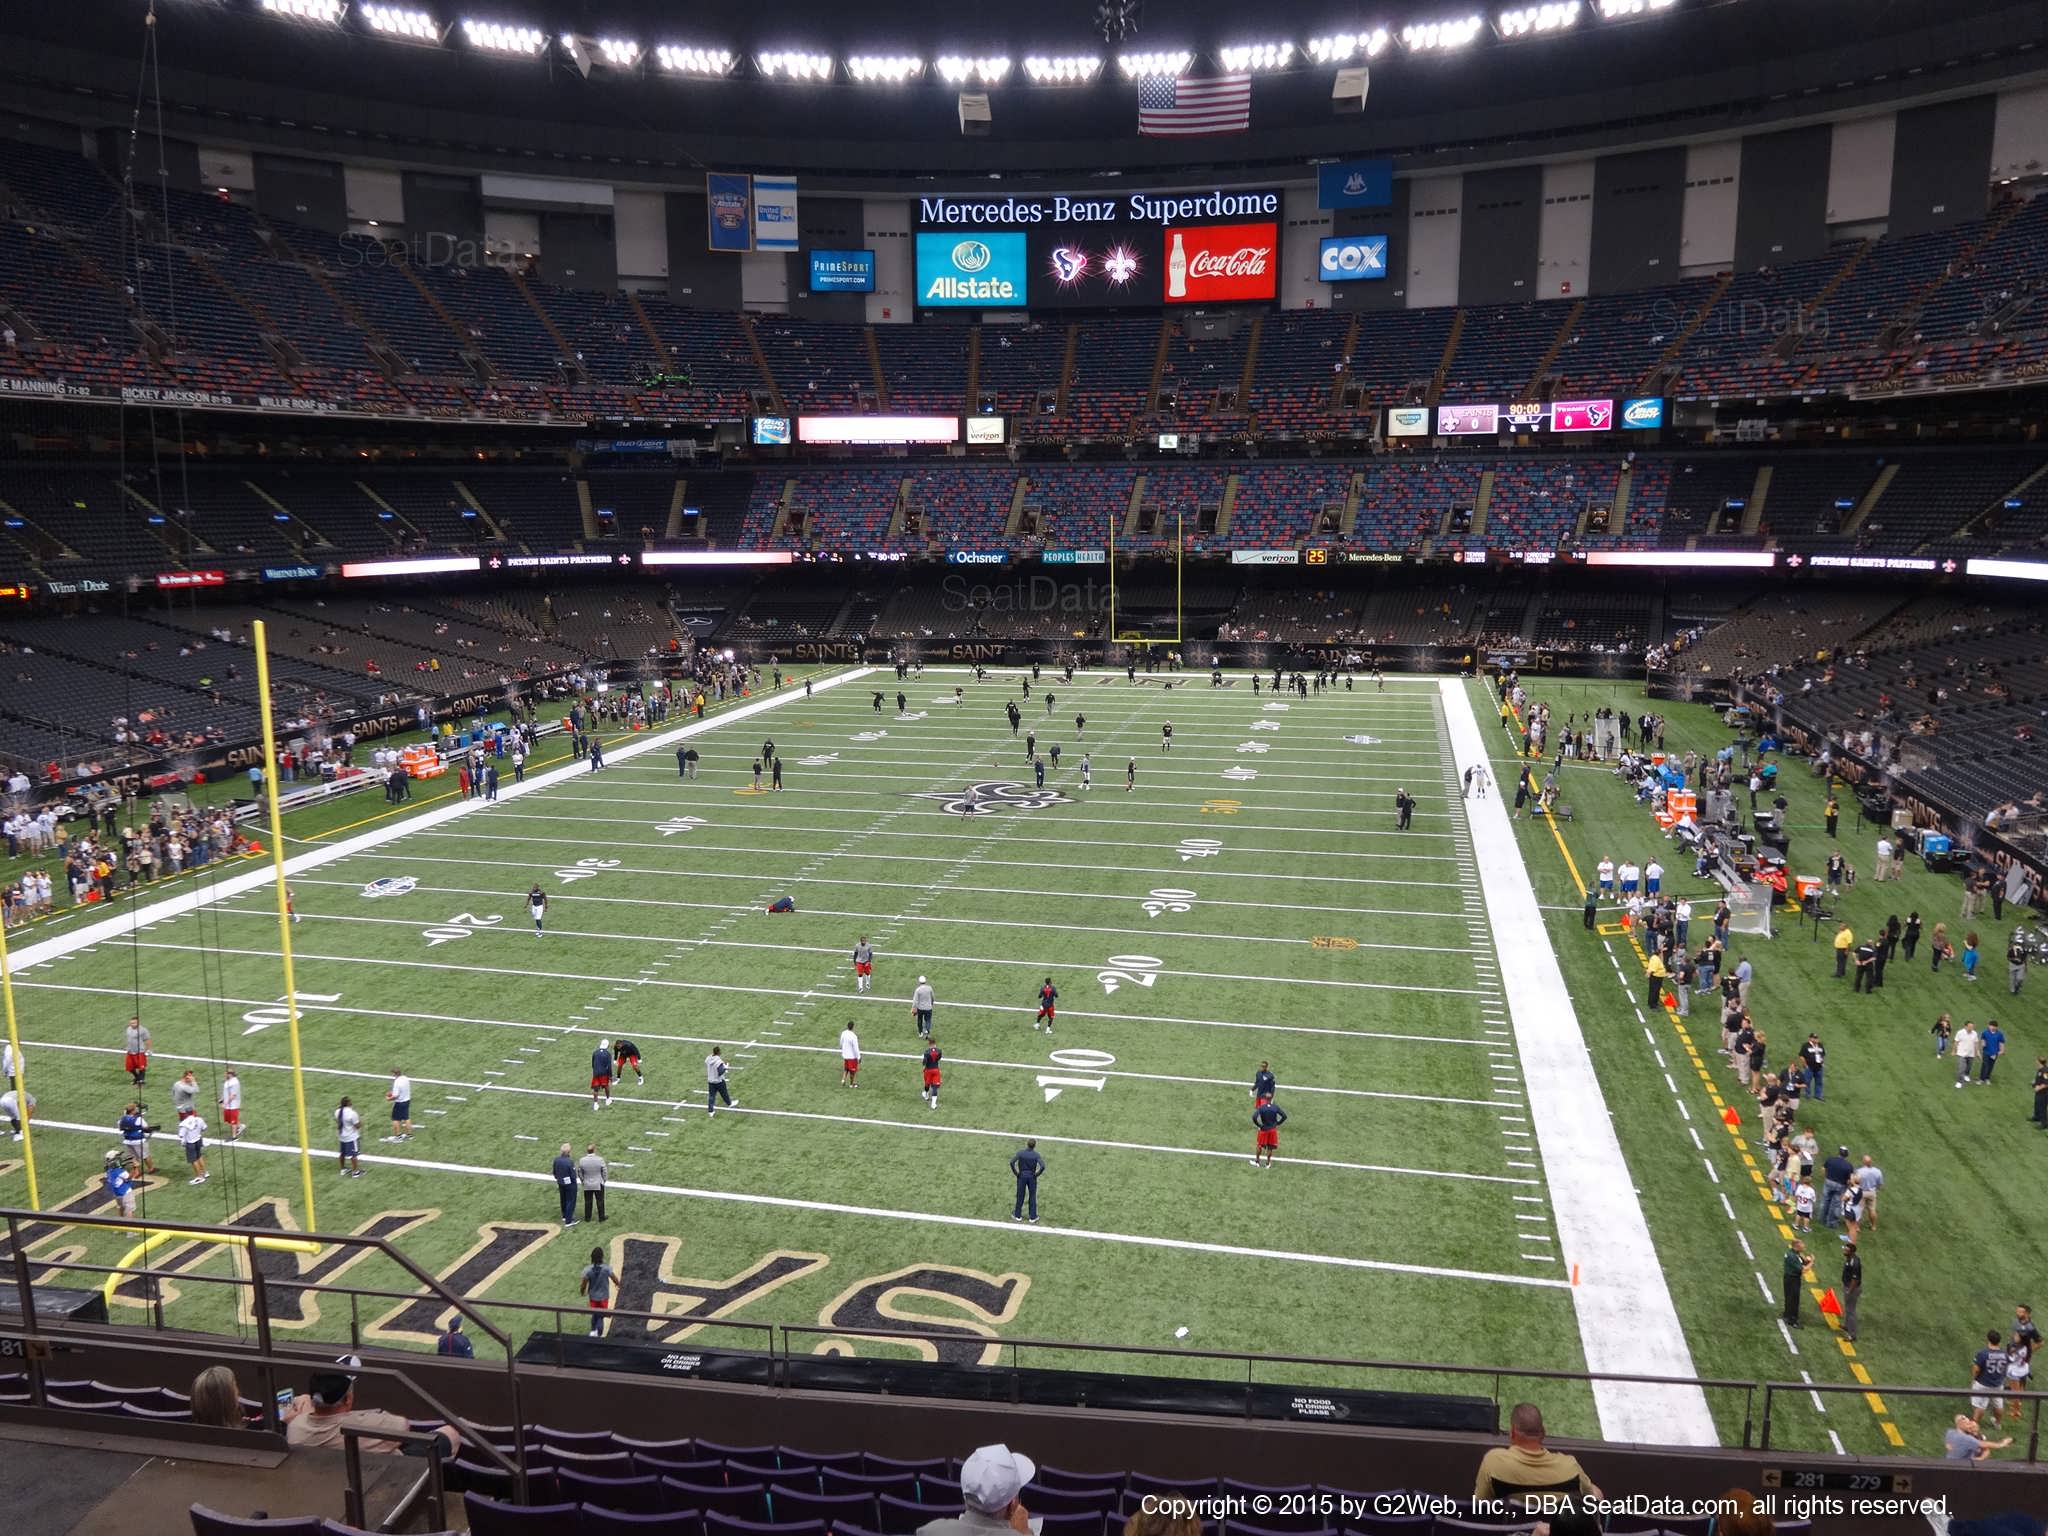 Seat view from section 346 at the Mercedes-Benz Superdome, home of the New Orleans Saints